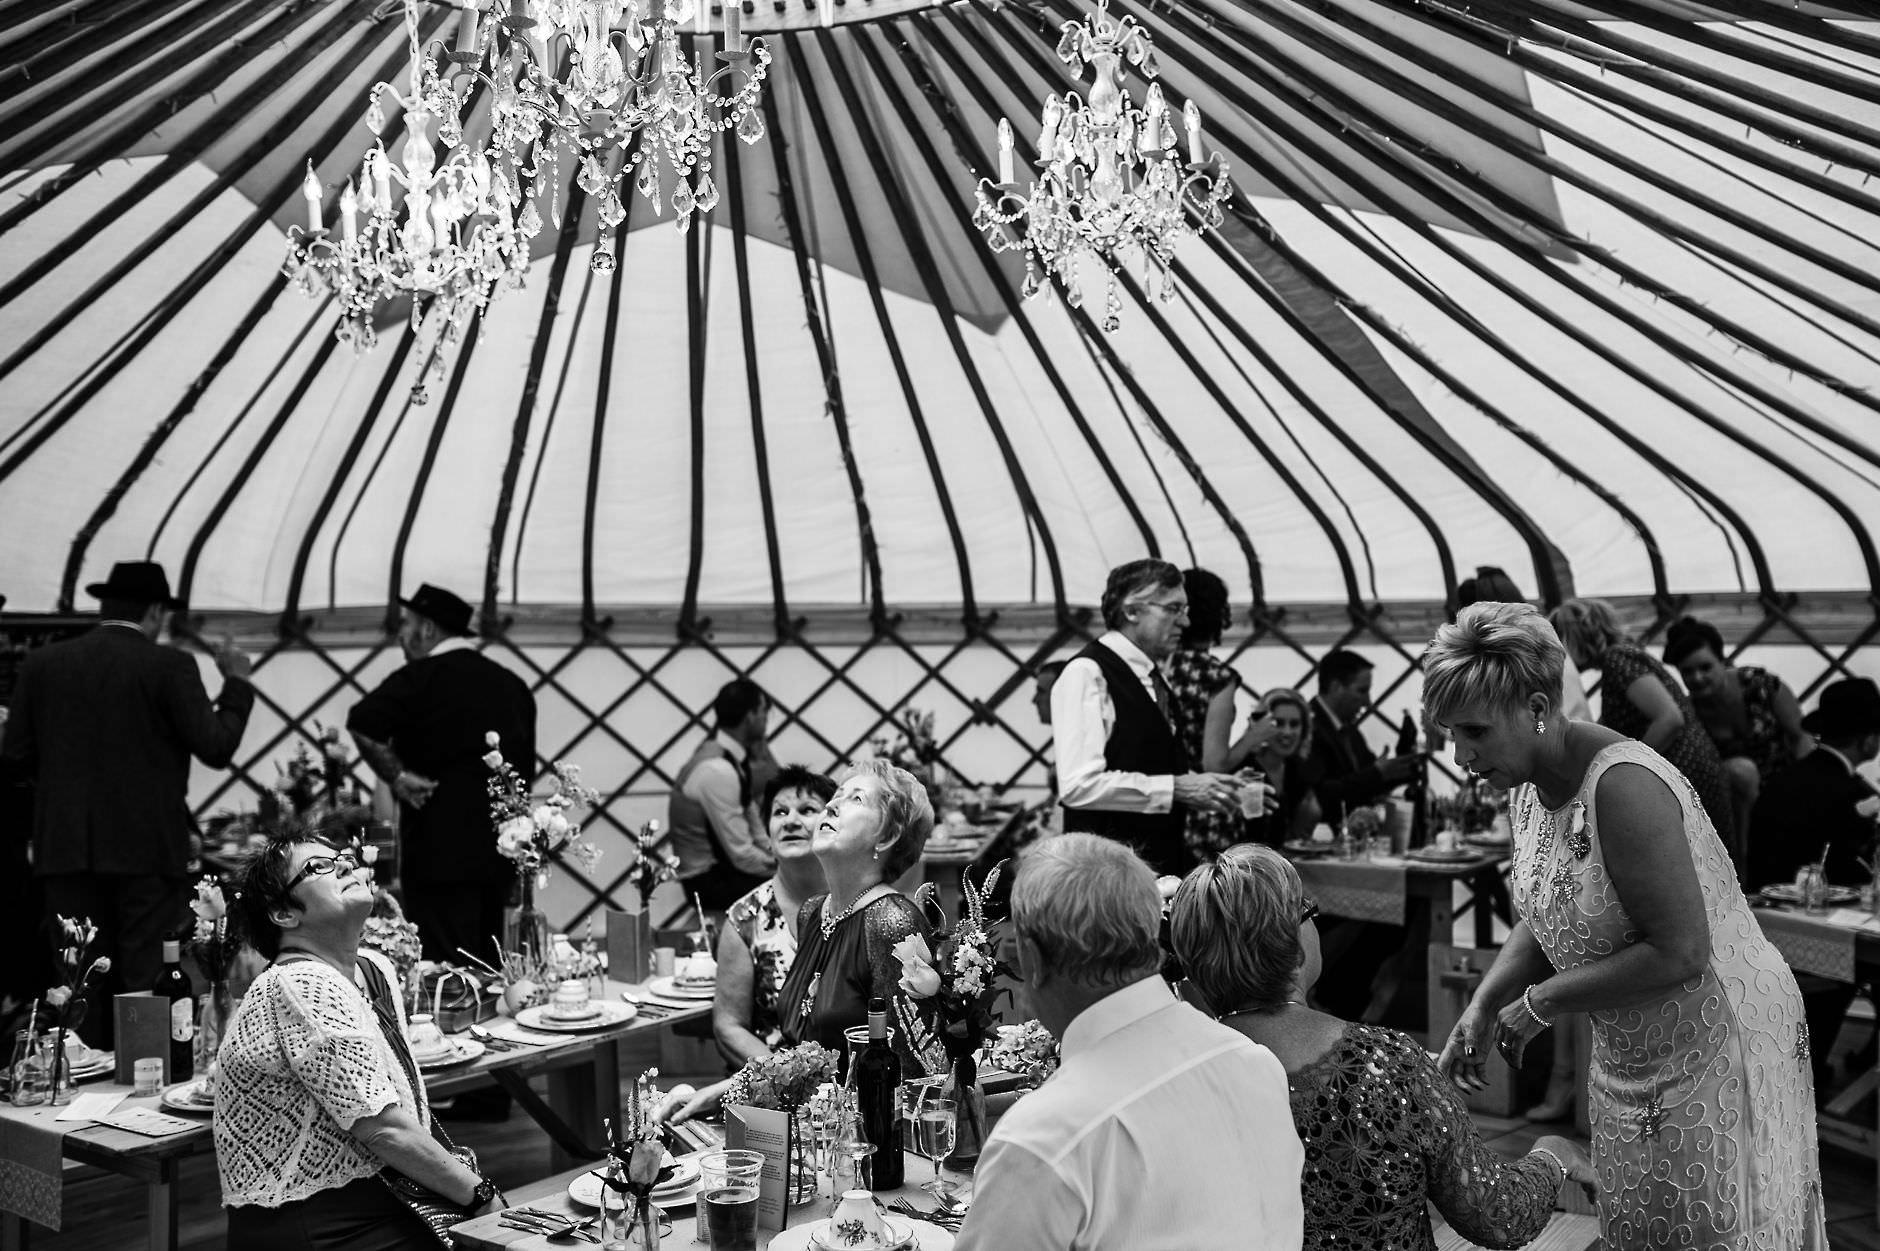 guests admiring the yurt's interior